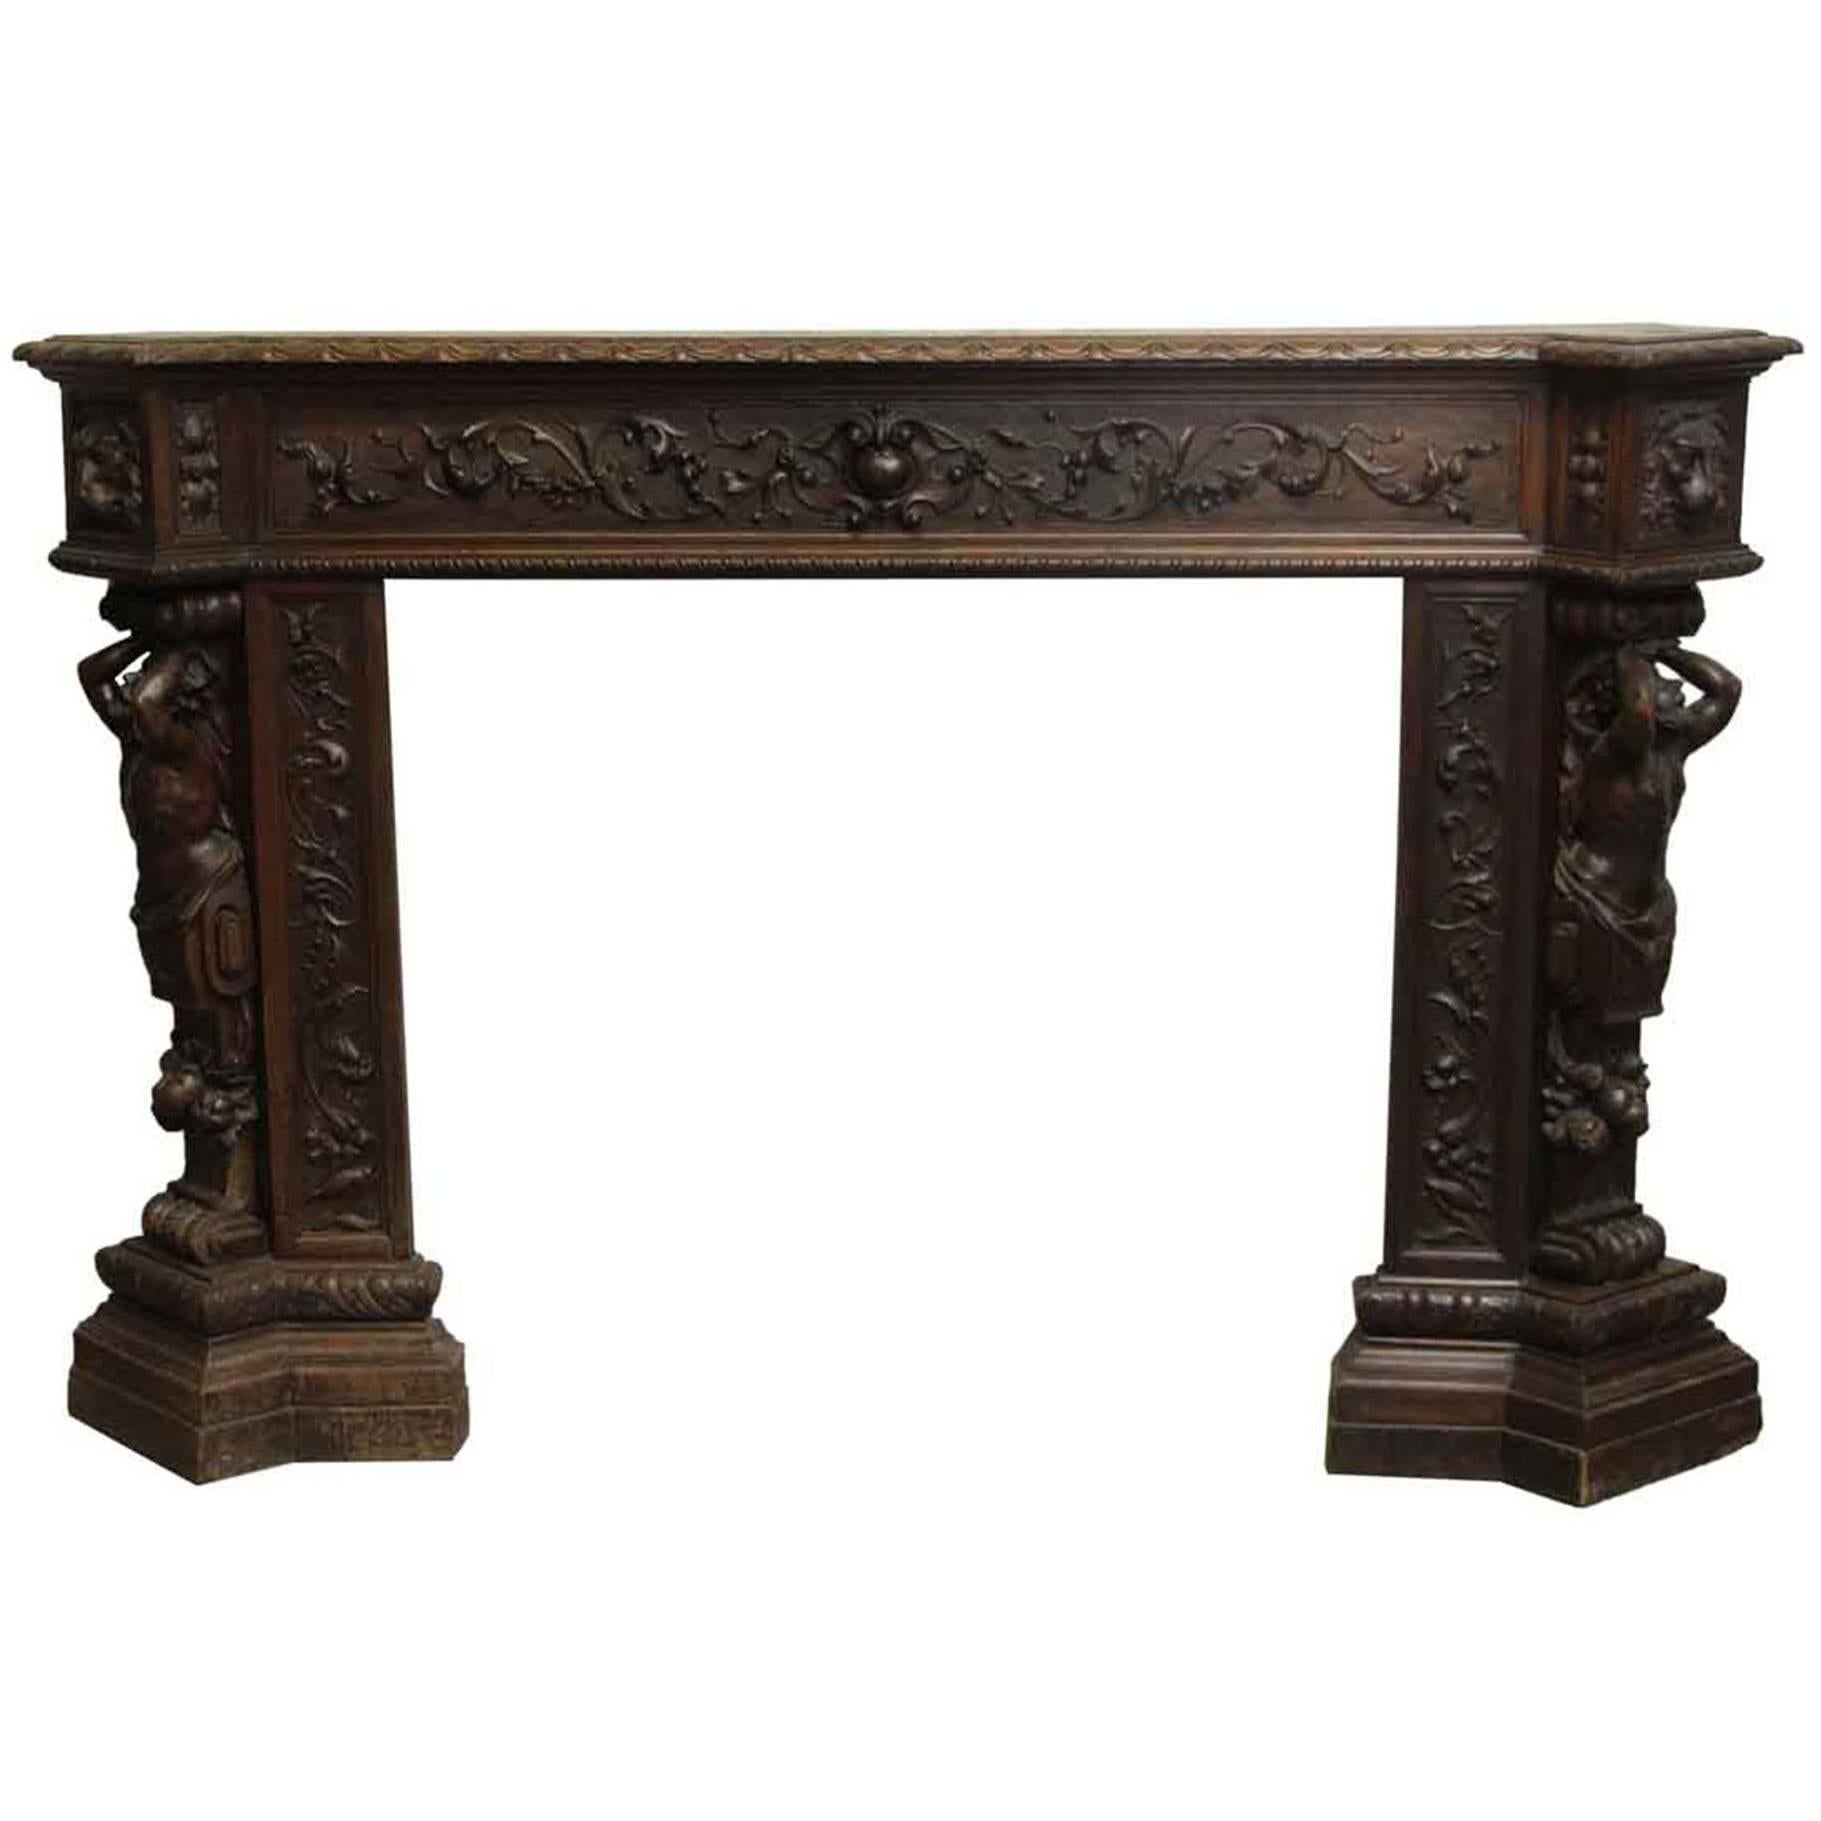 Gorgeous Mahogany Hand-Carved Figural Mantel Maidens